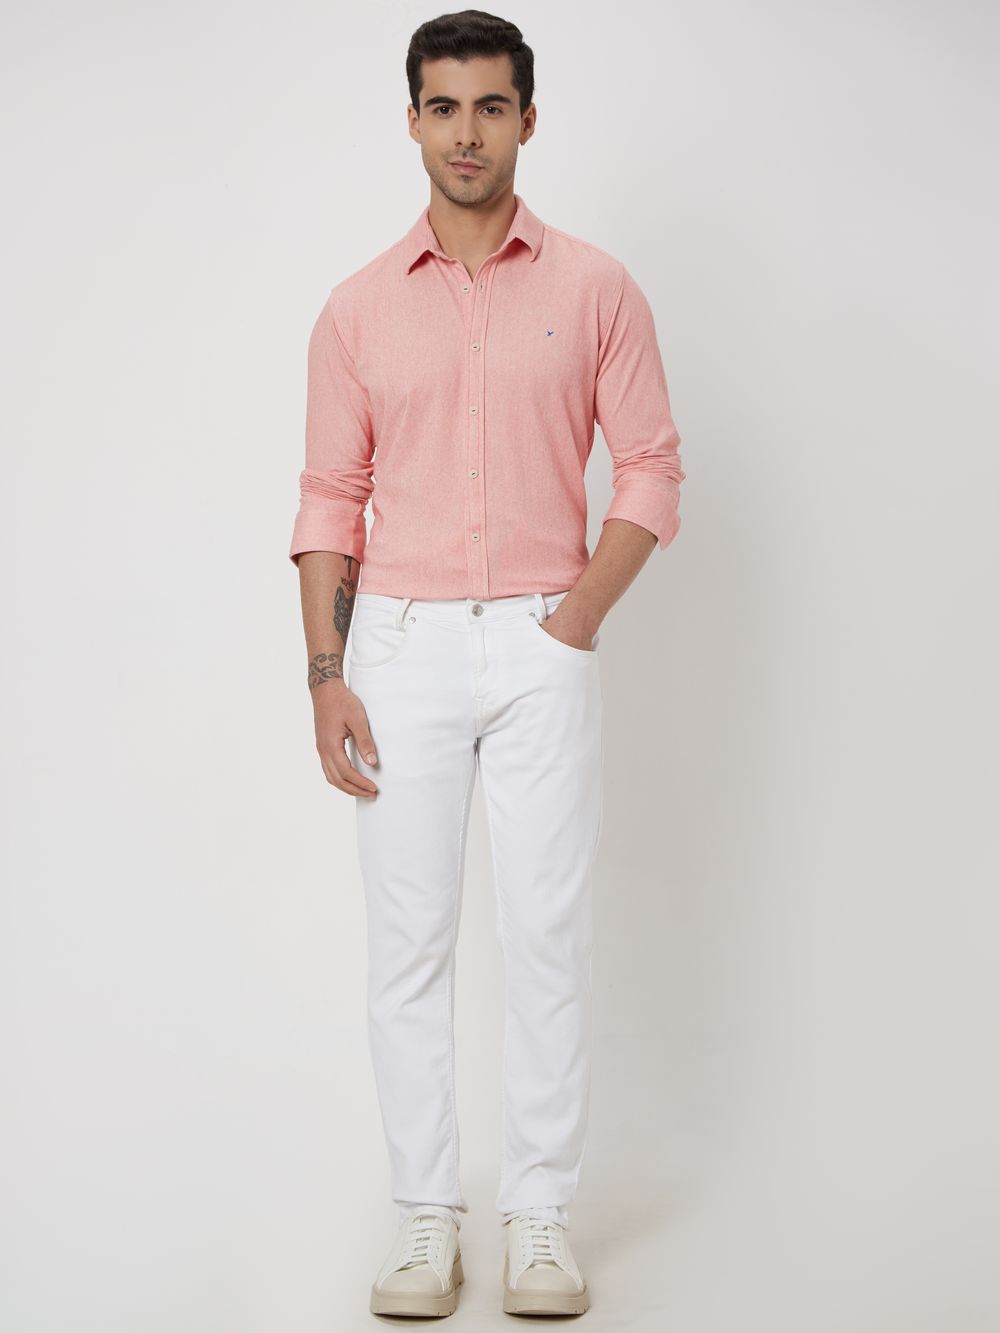 Red & White Pin Stripe Slim Fit Casual Shirt